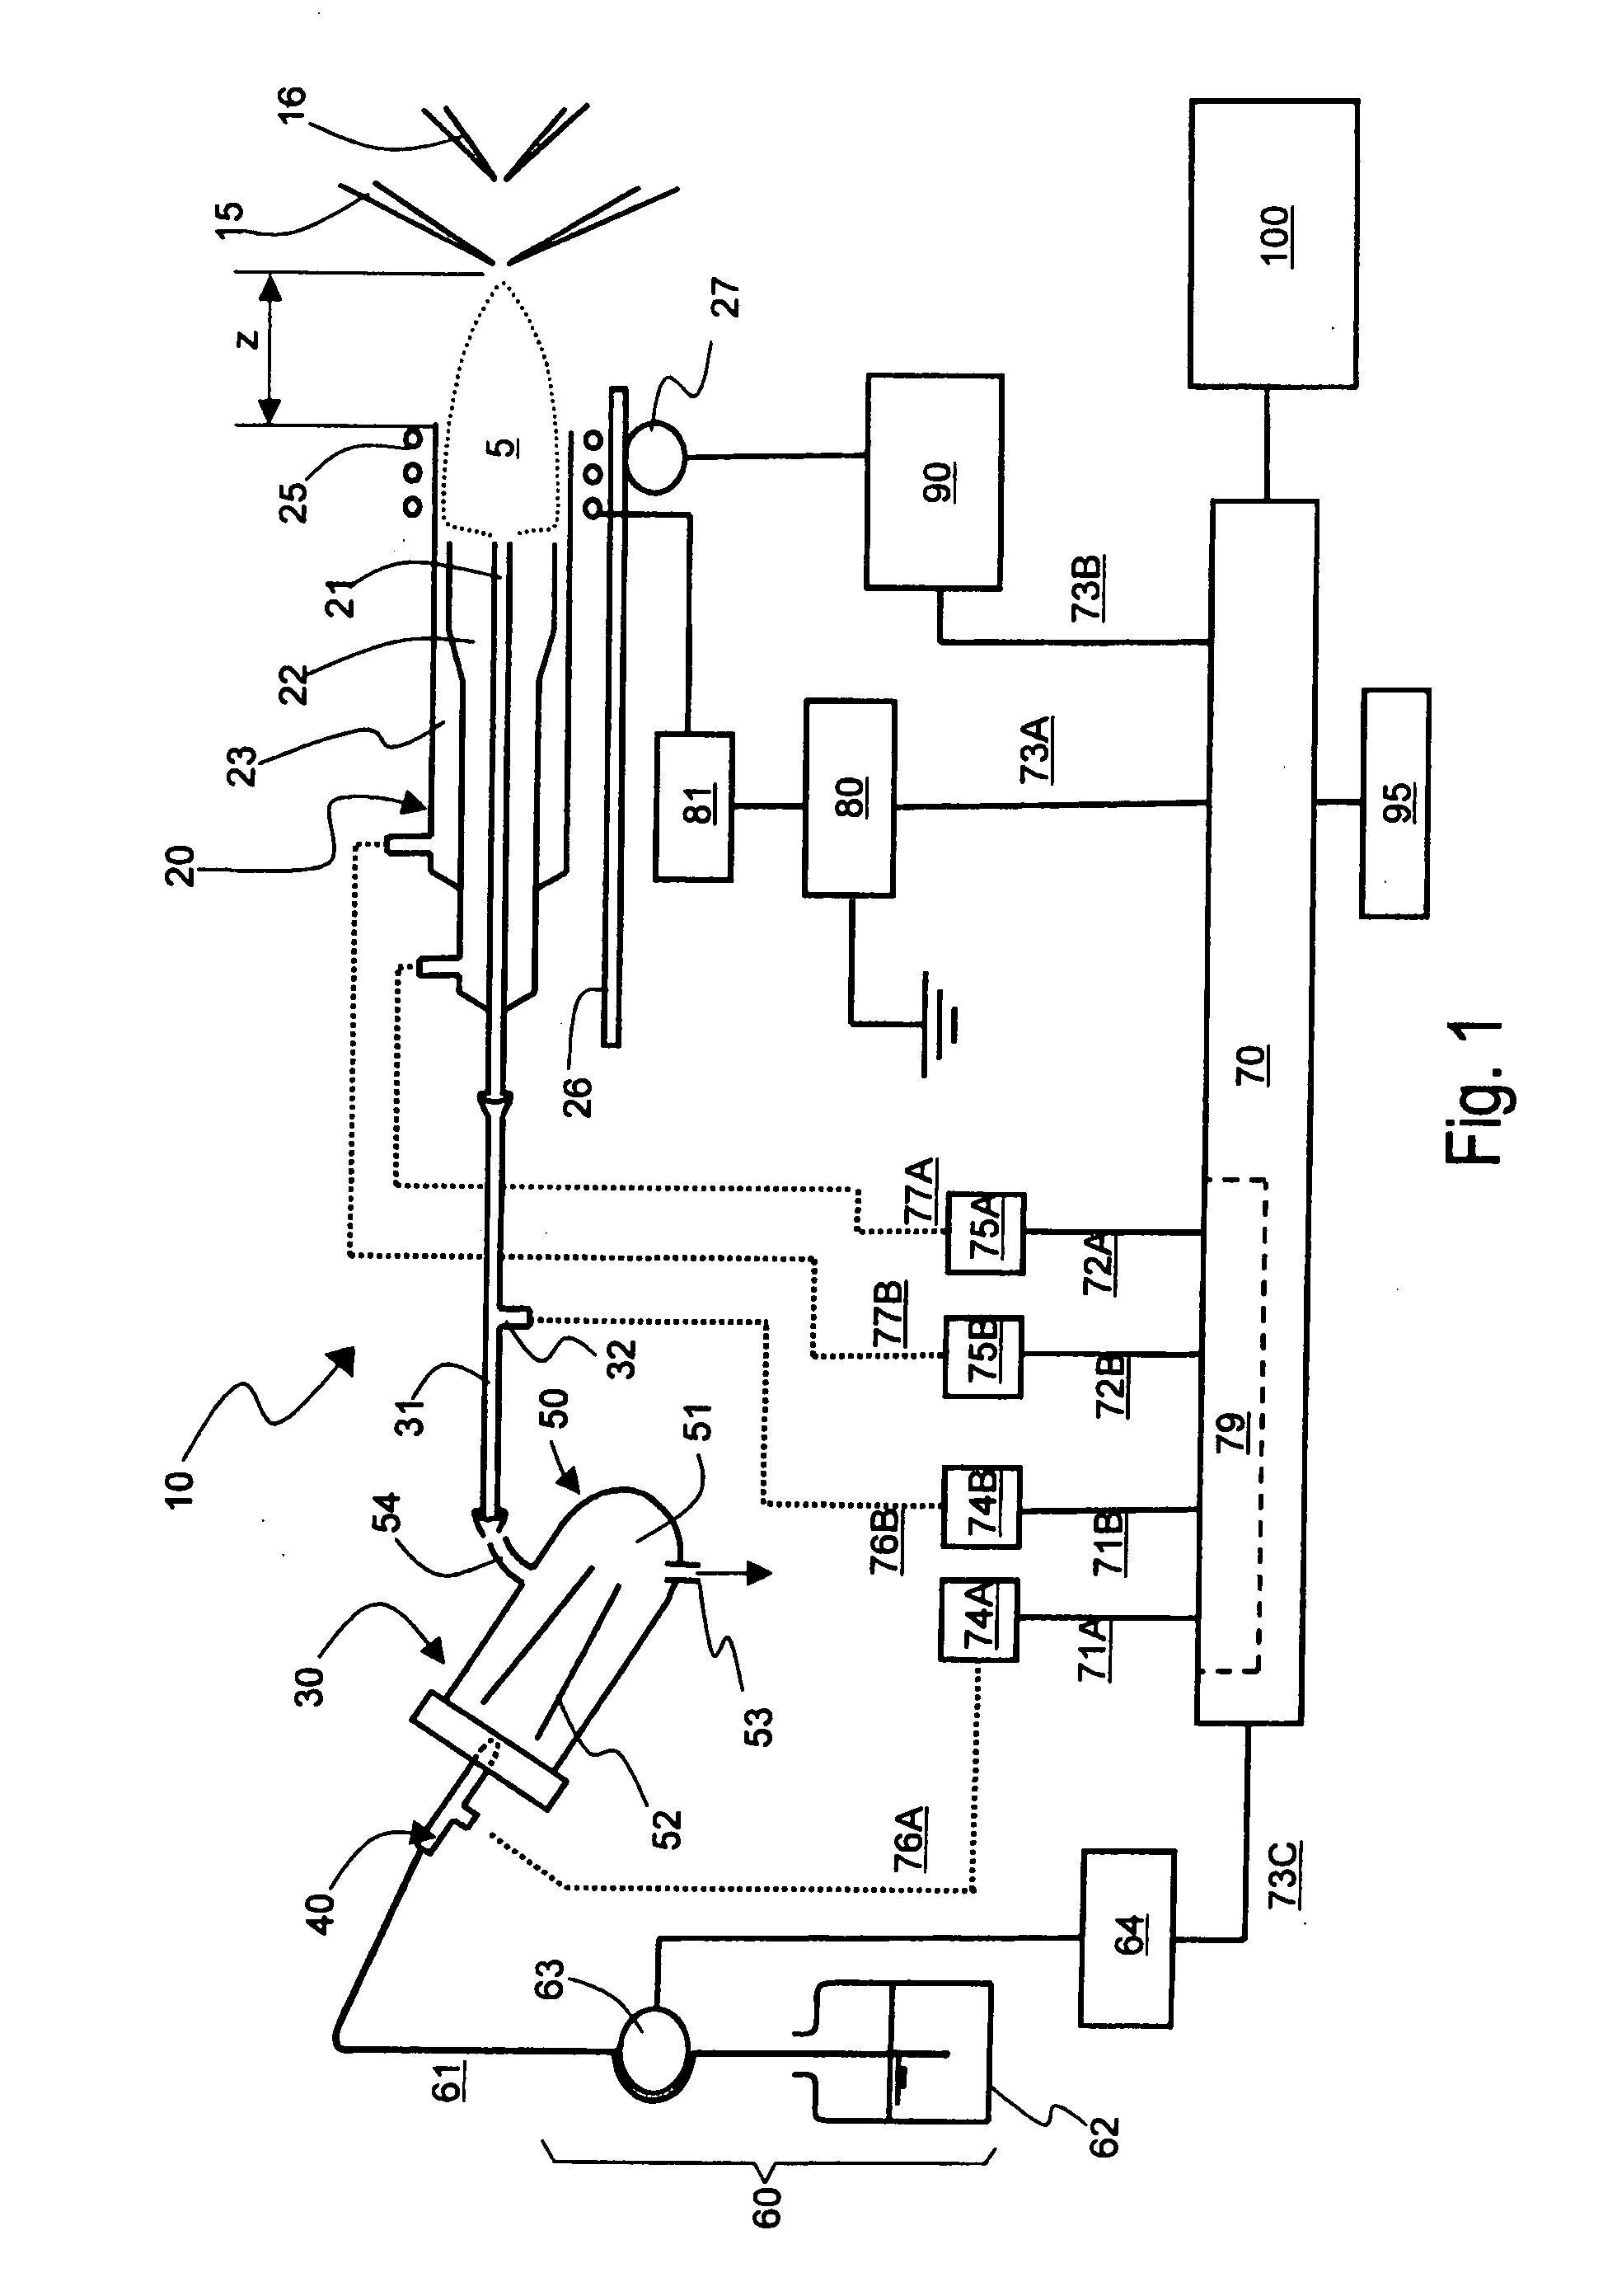 Diagnosis and calibration system for ICP-MS apparatus